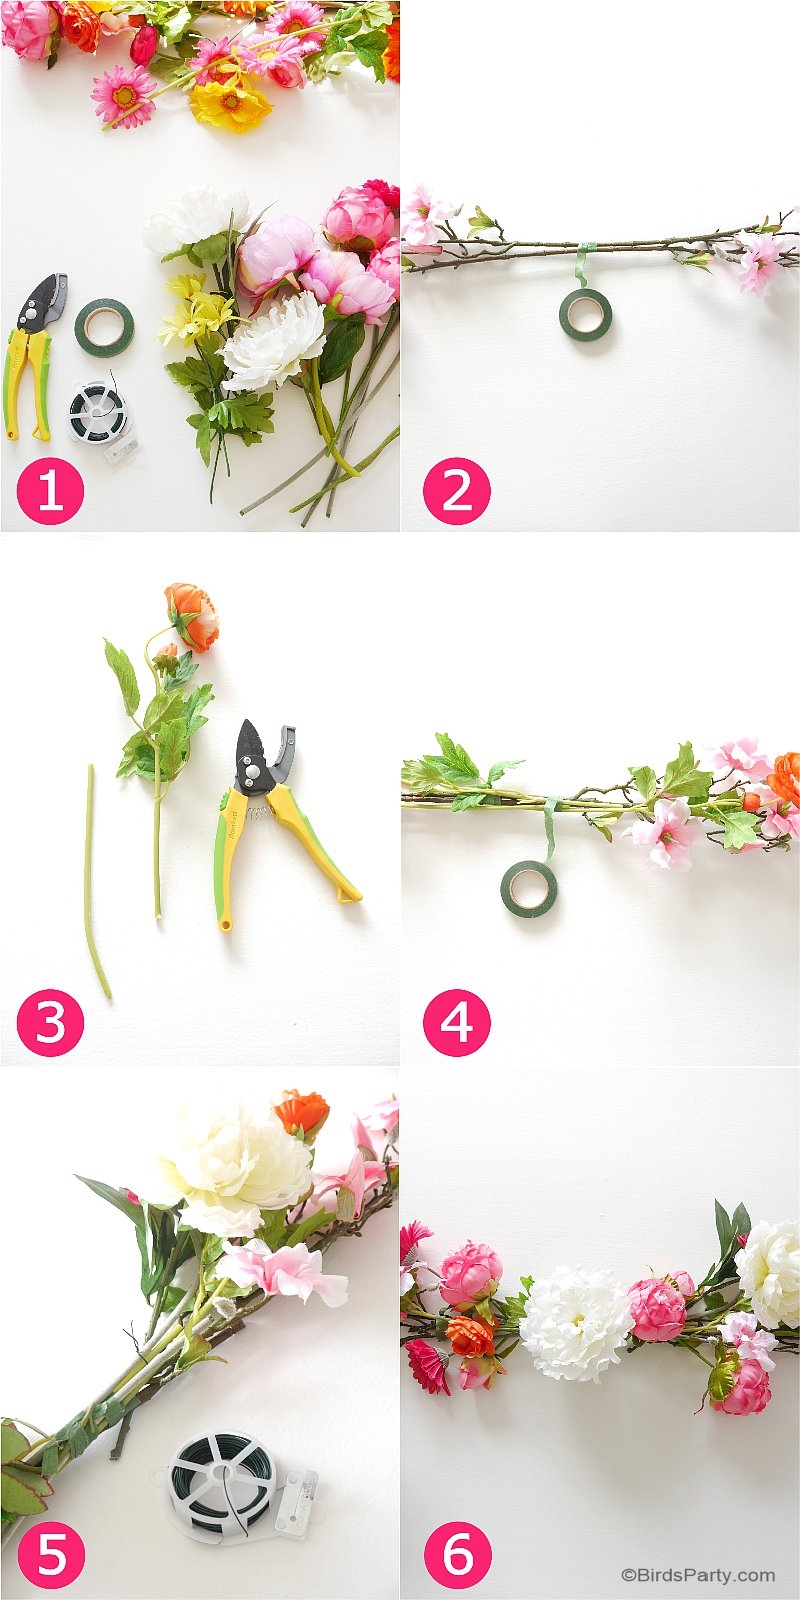 DIY Floral Table Runner - learn to make this easy table decor centerpiece for your Easter brunch, baby or bridal showers, weddng or Spring parties! | BirdsParty.com @BirdsParty